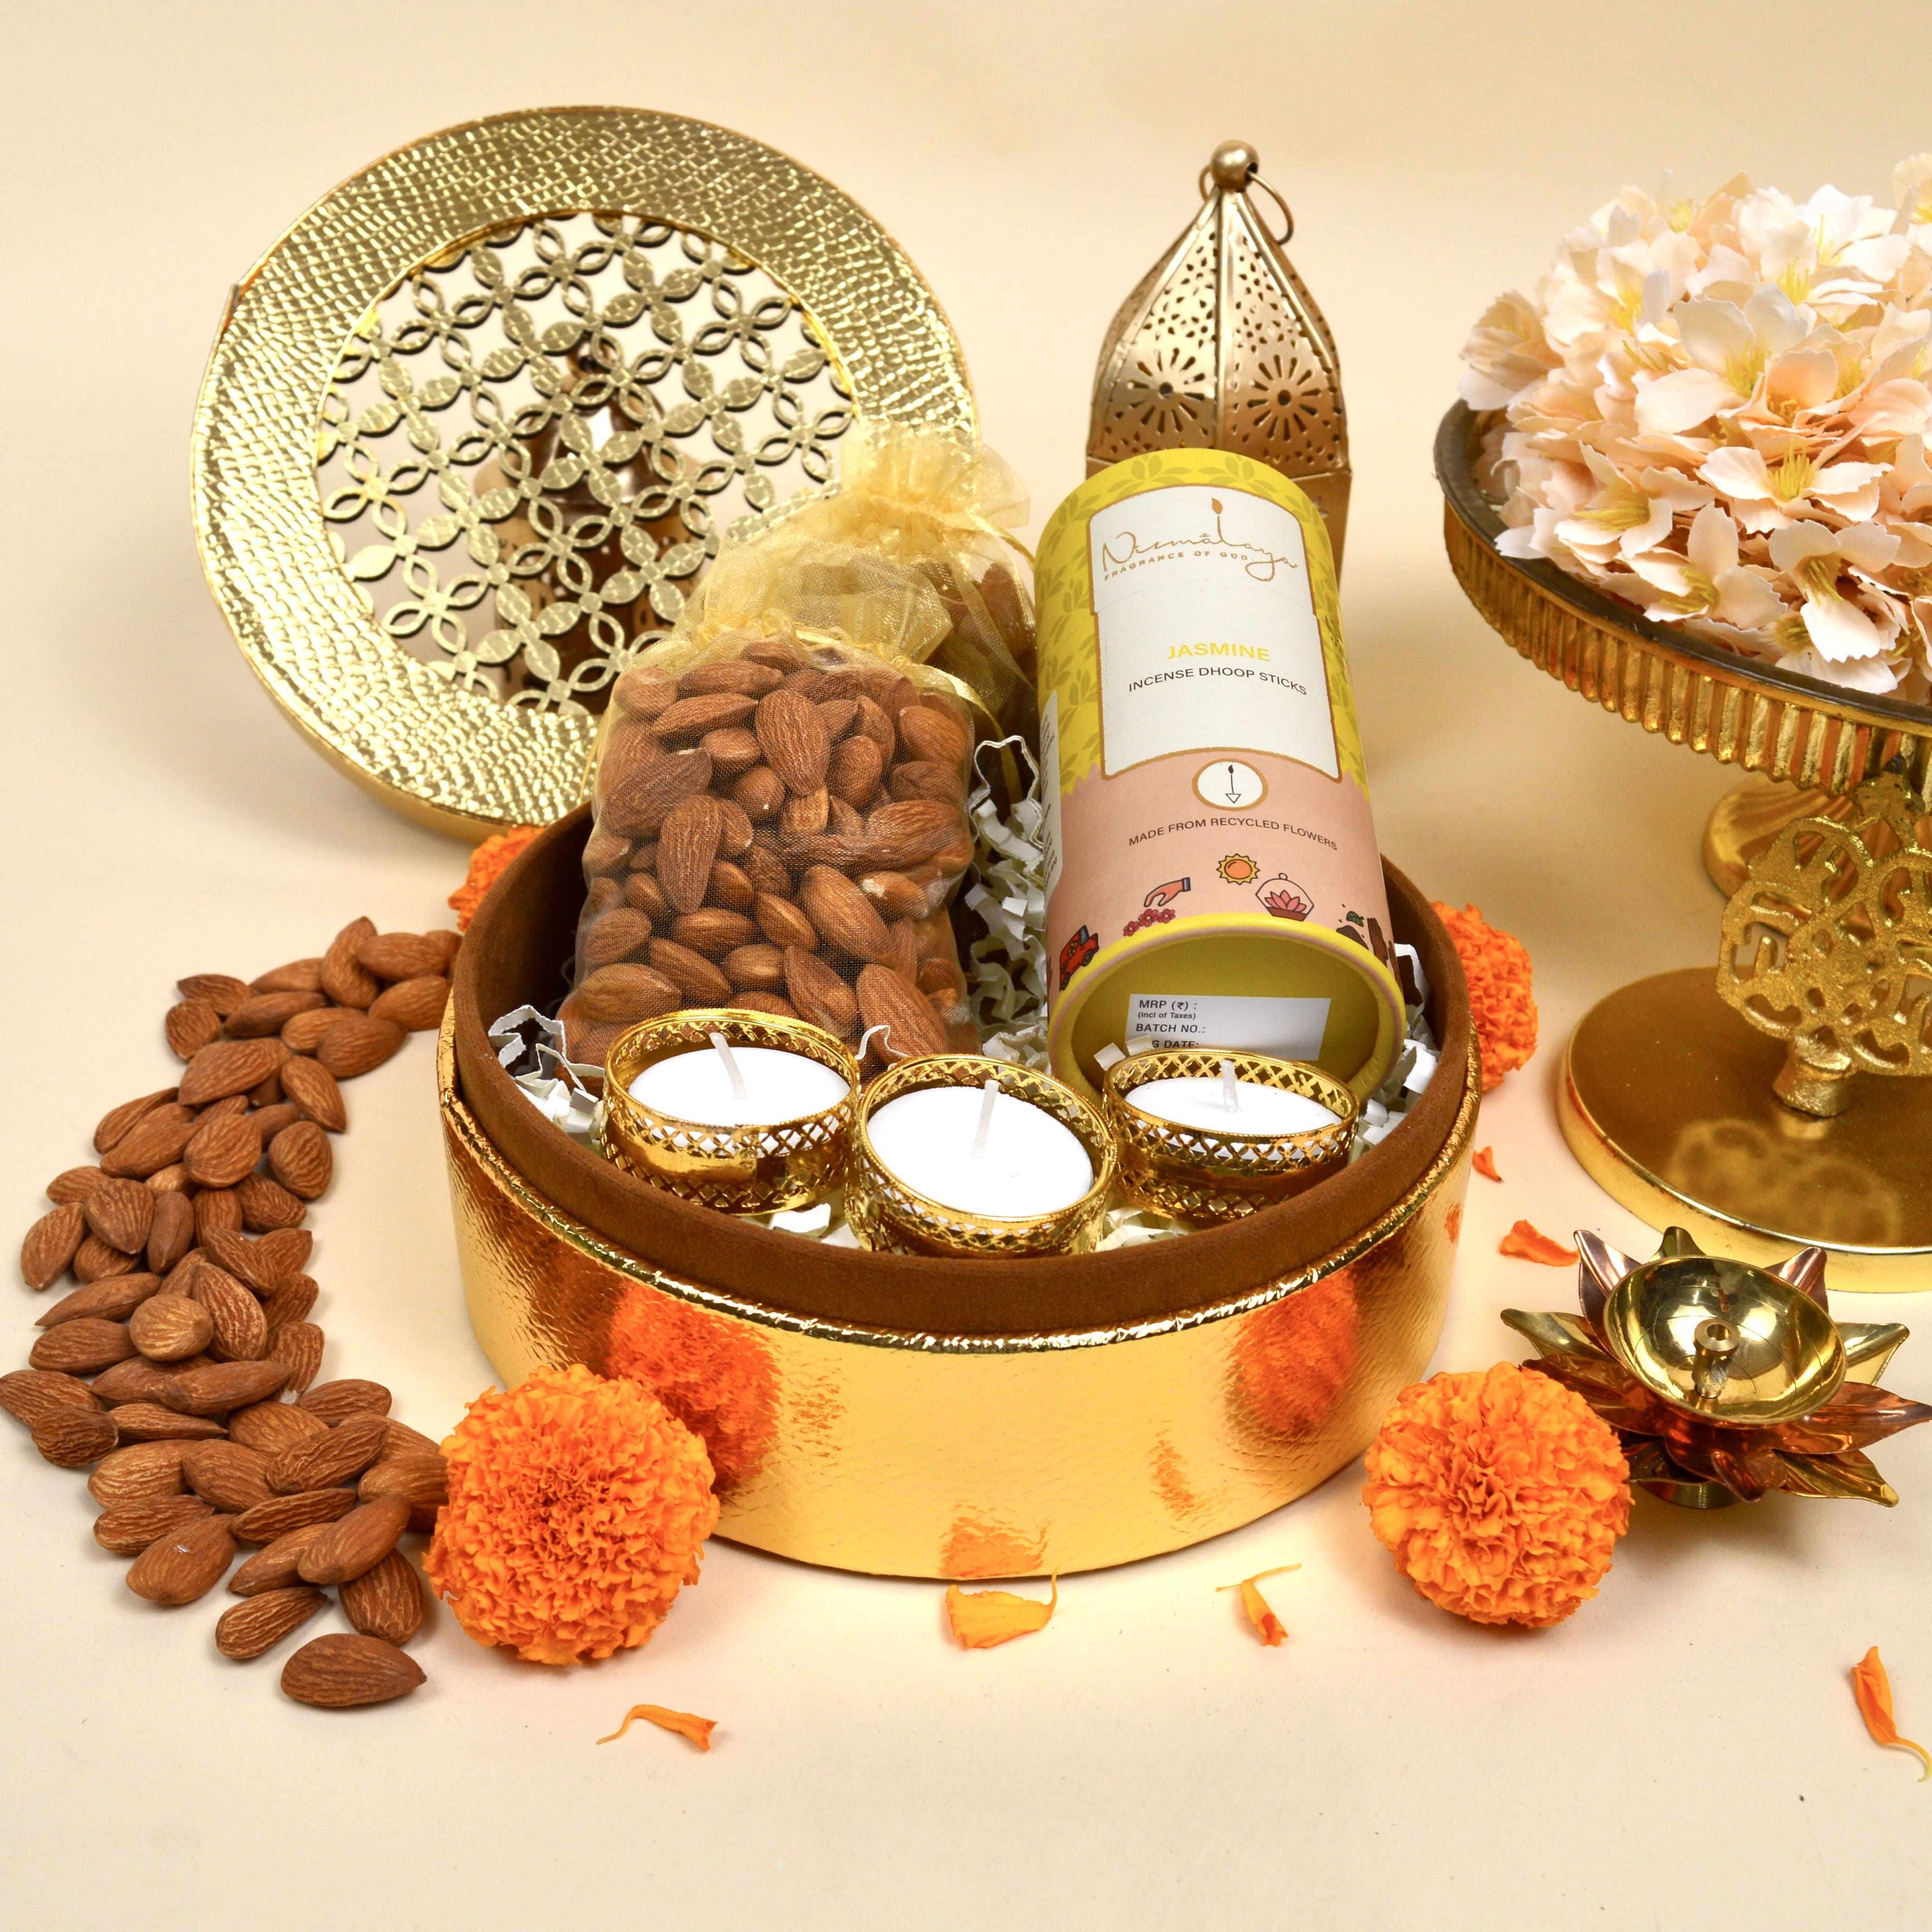 NUTRI MIRACLE Corporate Eco Friendly Gift Hamper for Employees for Diwali |  Dry Fruits and Chocolate Gift Hamper for Diwali | New Year | Birthday :  Amazon.in: Grocery & Gourmet Foods